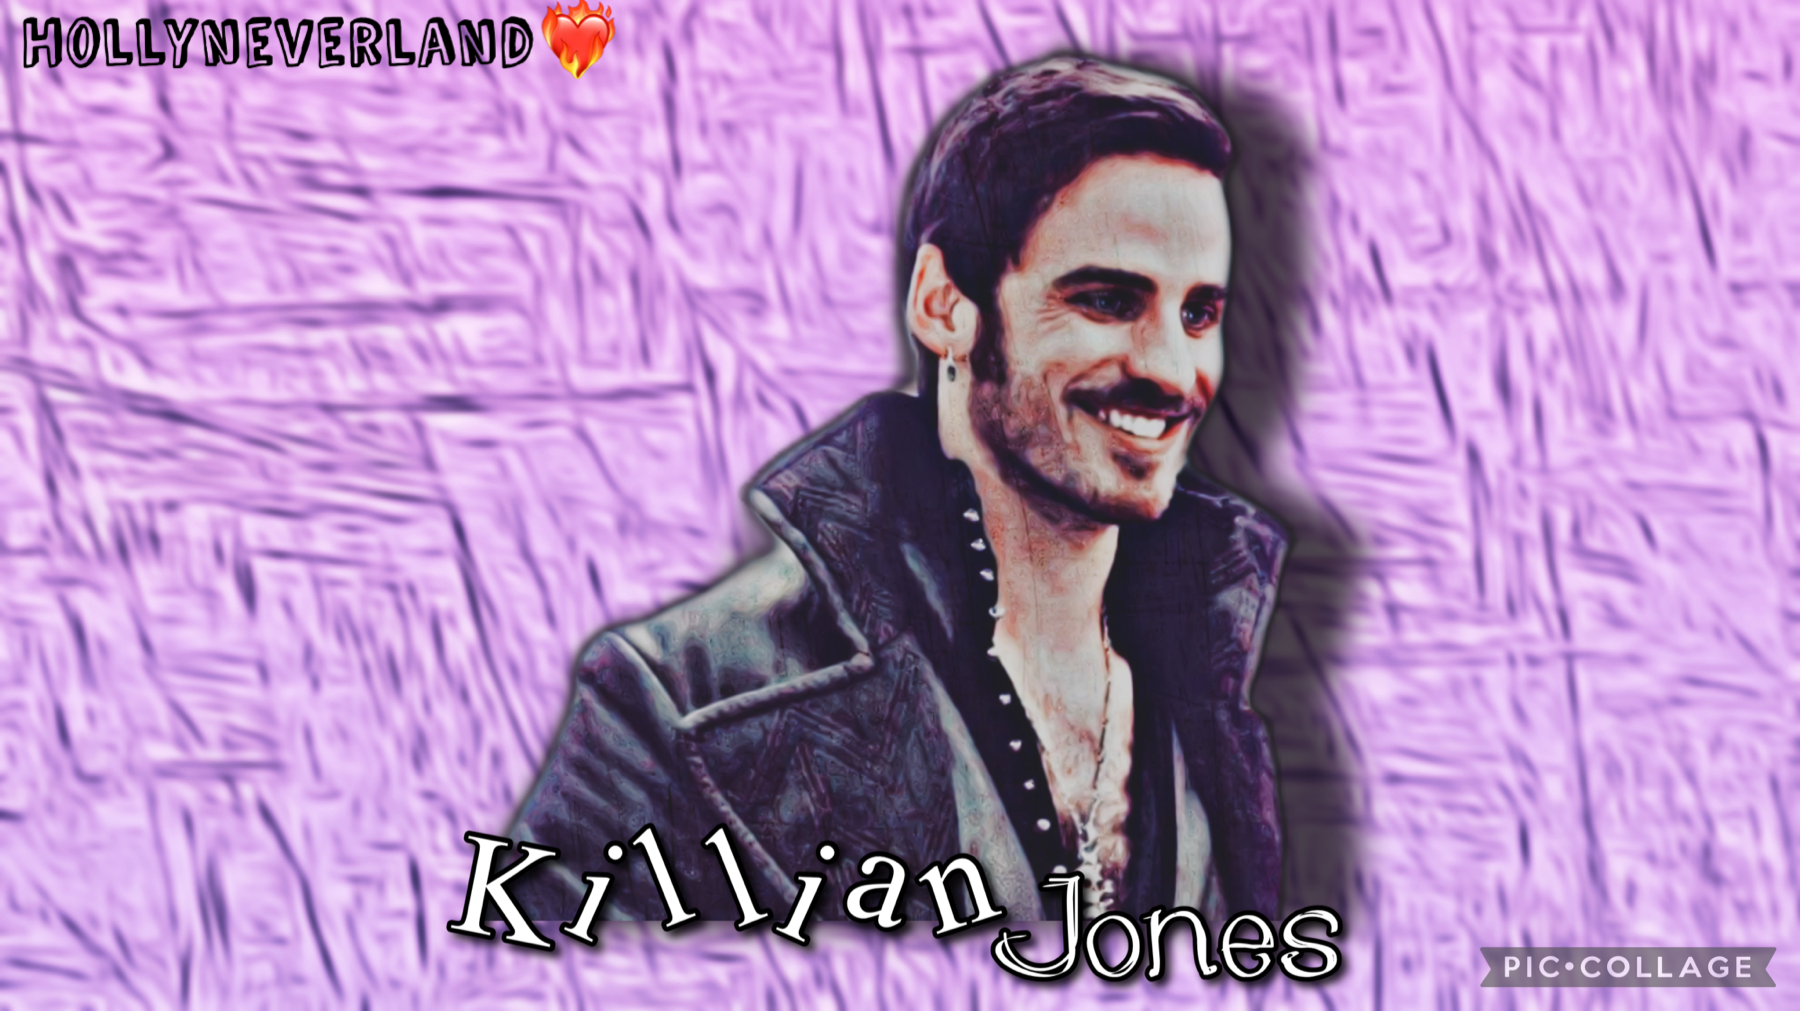 Killian Jones 🤪❤️‍🔥 I honestly love my edit tumbnails!!! 

Anyways rate/10 and pls follow my TikTok an Instagram if you want to see my video edits!!! 